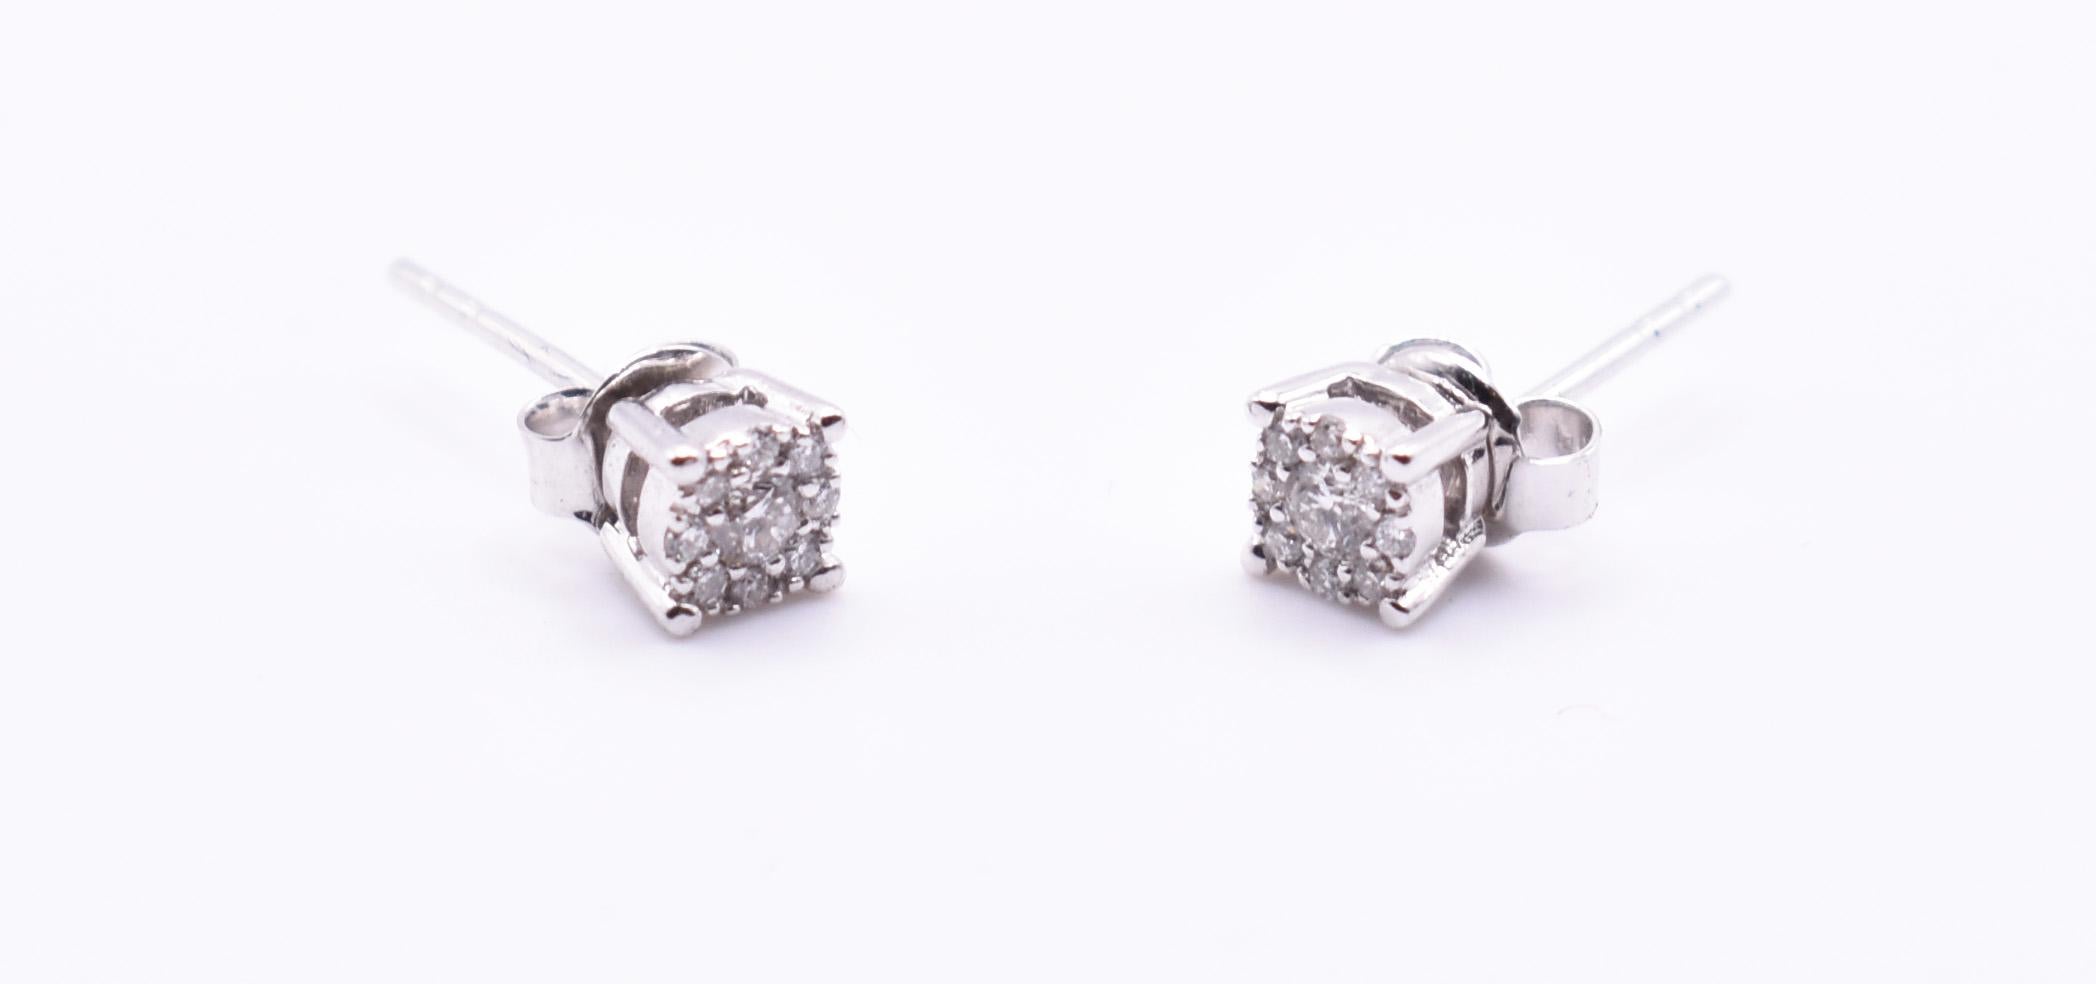 For sale is a lovely pair of 18k white gold illusion diamond stud earrings. Gold = 1.56g. Diamonds = 0.23ct